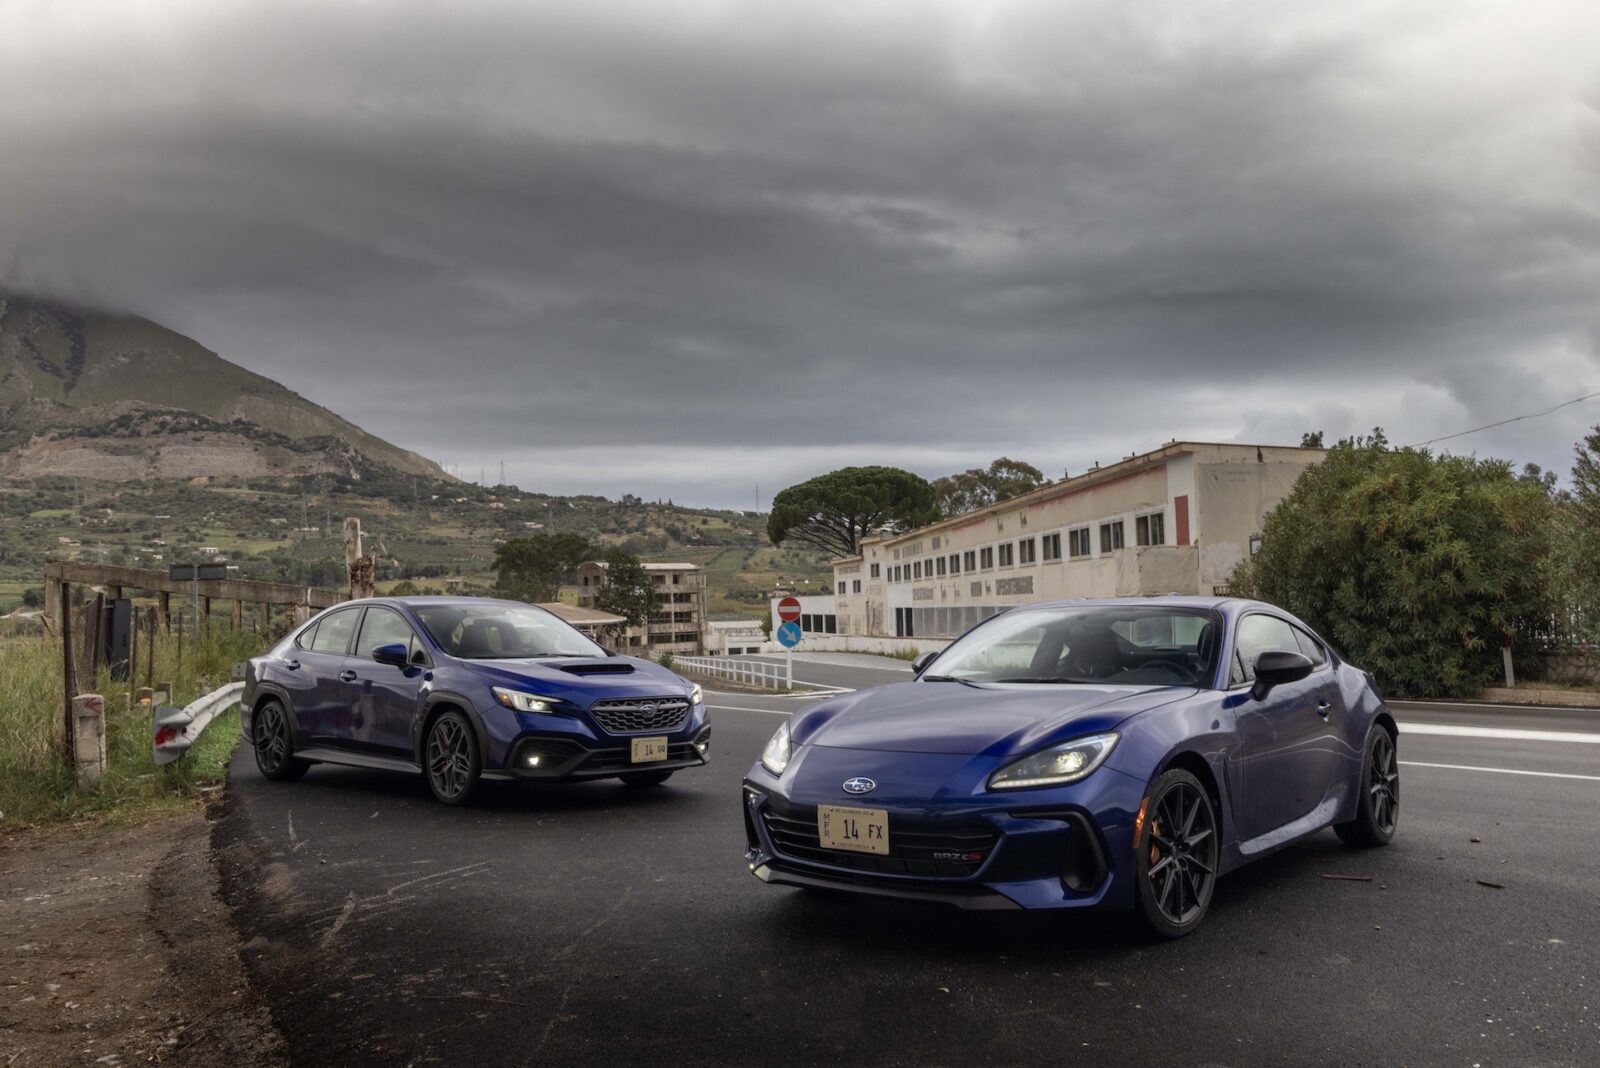 Chasing the Targa Florio’s ghost in the Subaru WRX TR and BRZ tS